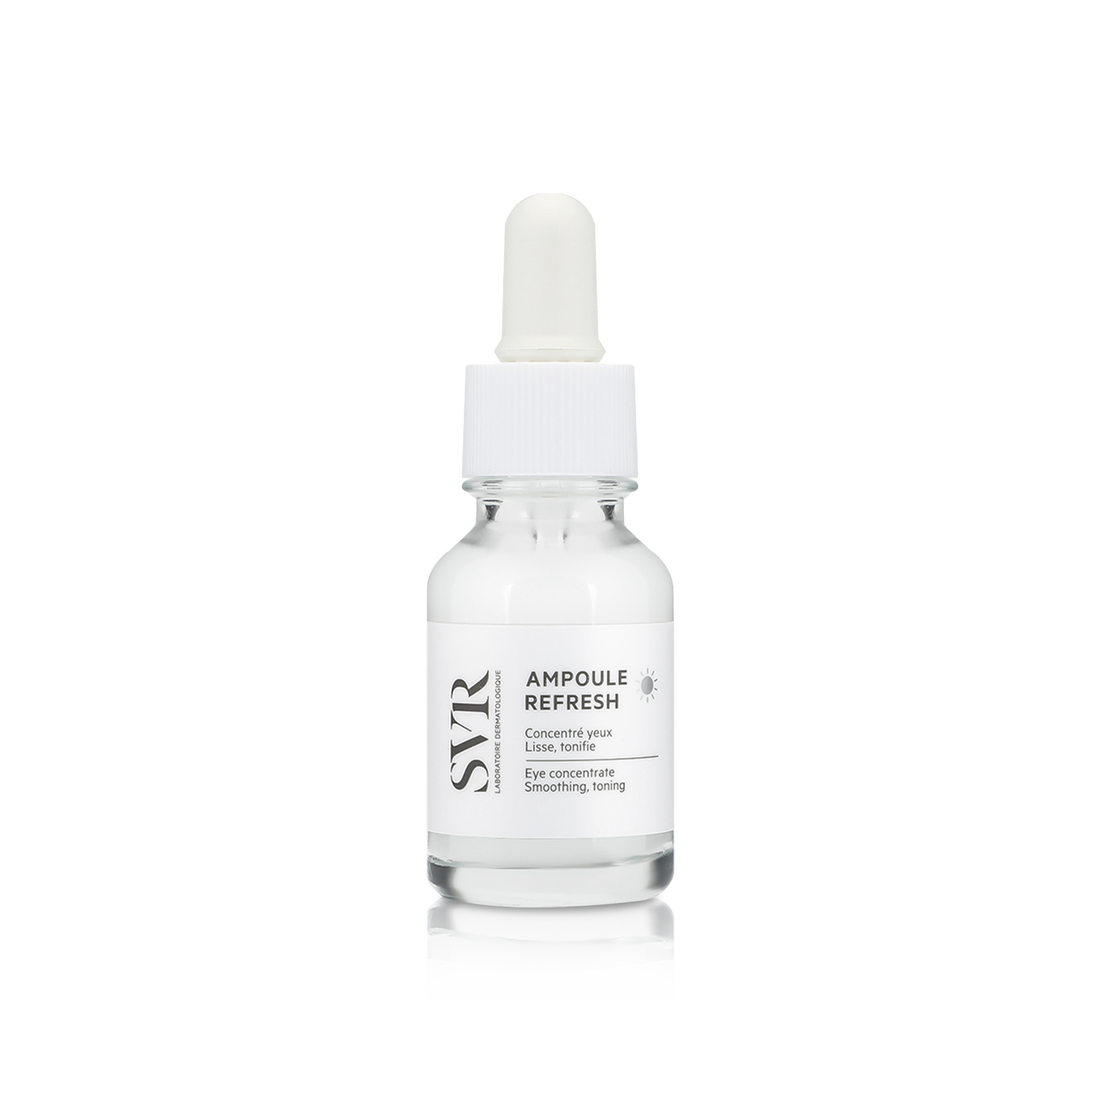 Ampoule Refresh Eye Concentrate